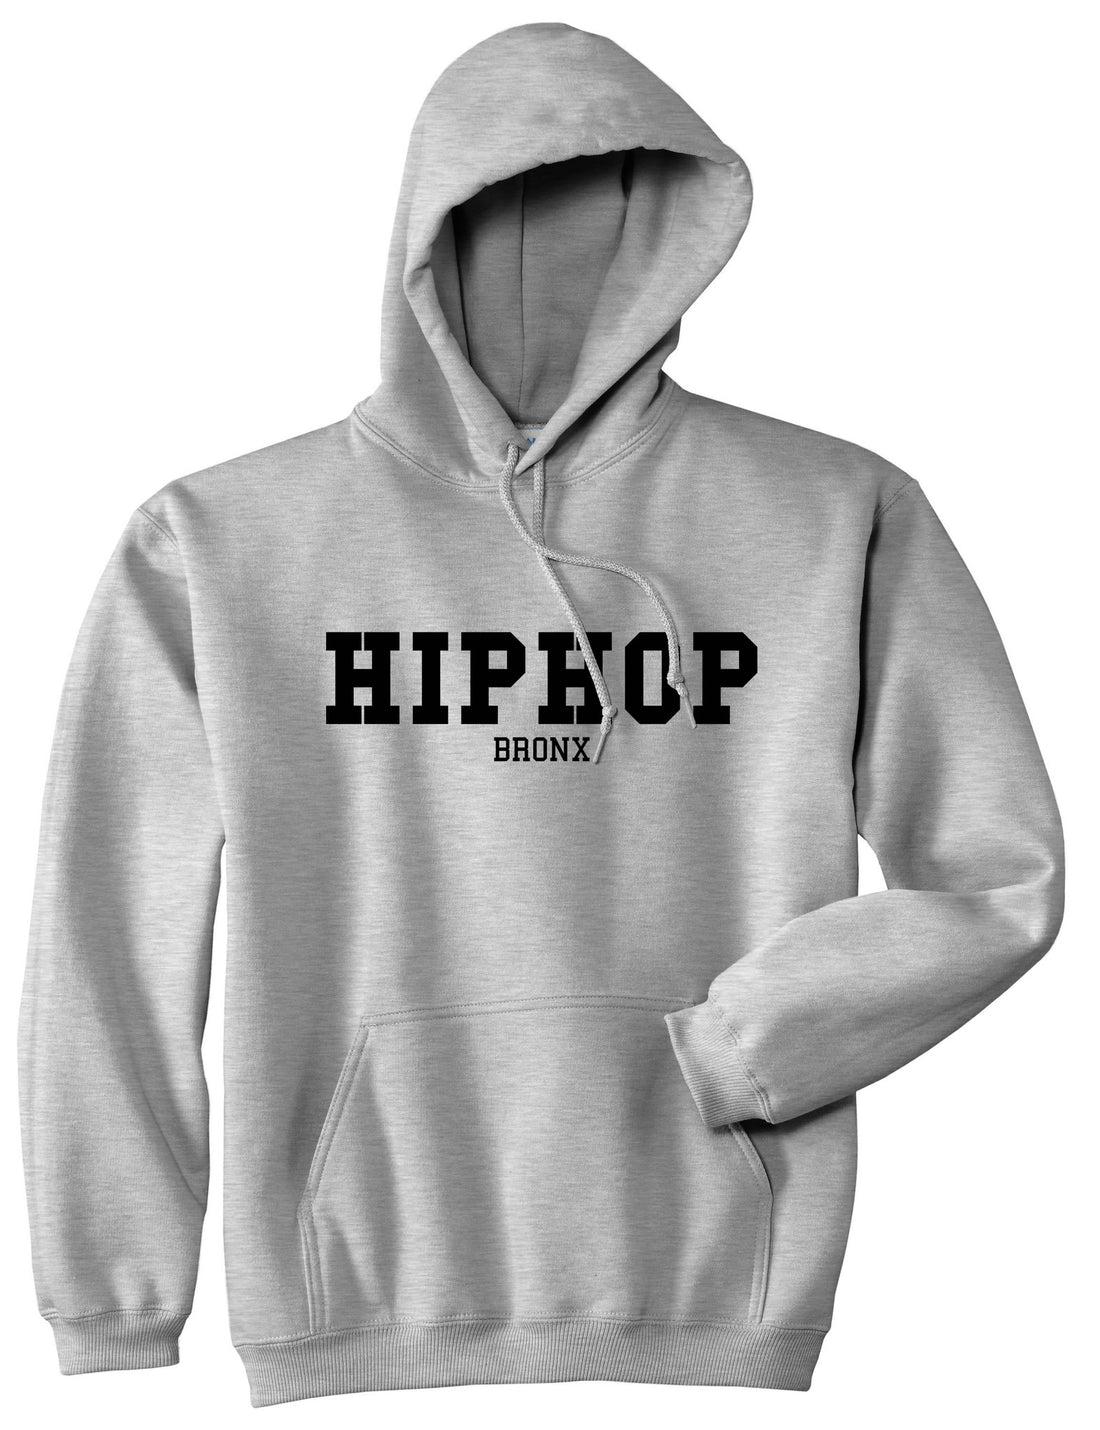 Hiphop the Bronx Pullover Hoodie Hoody in Grey by Kings Of NY